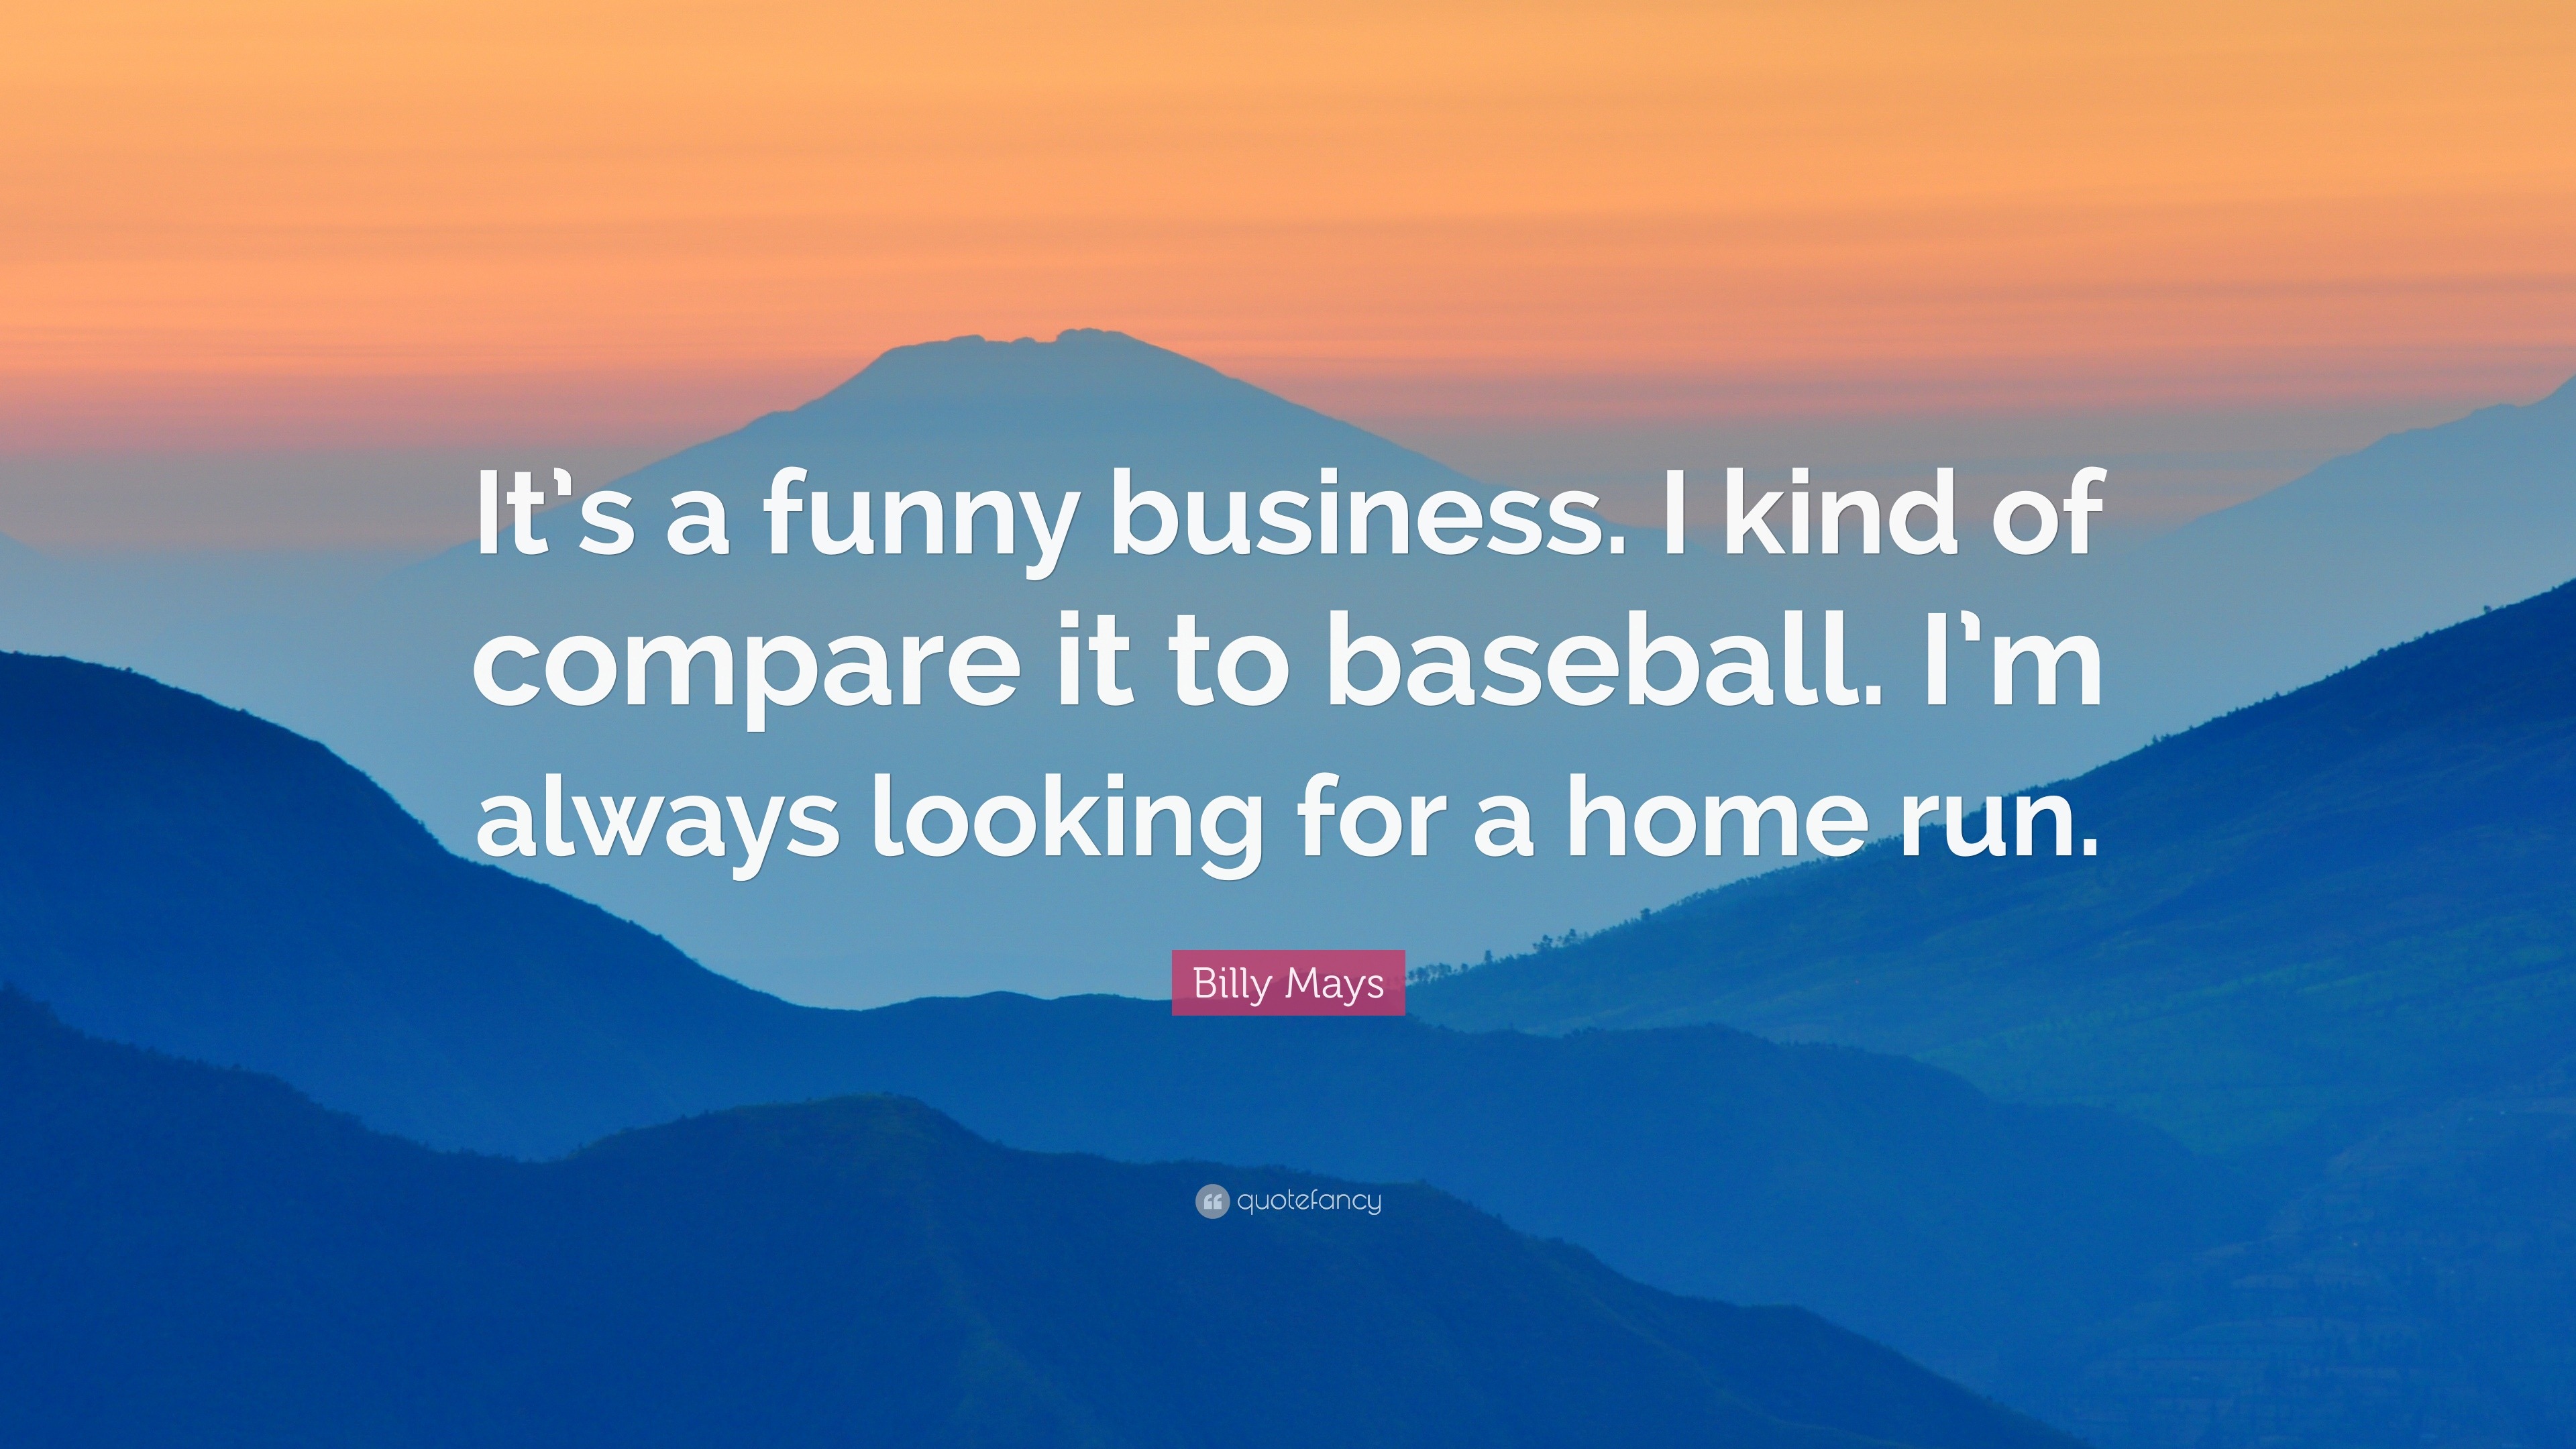 Billy Mays Quote: “It’s a funny business. I kind of compare it to ...